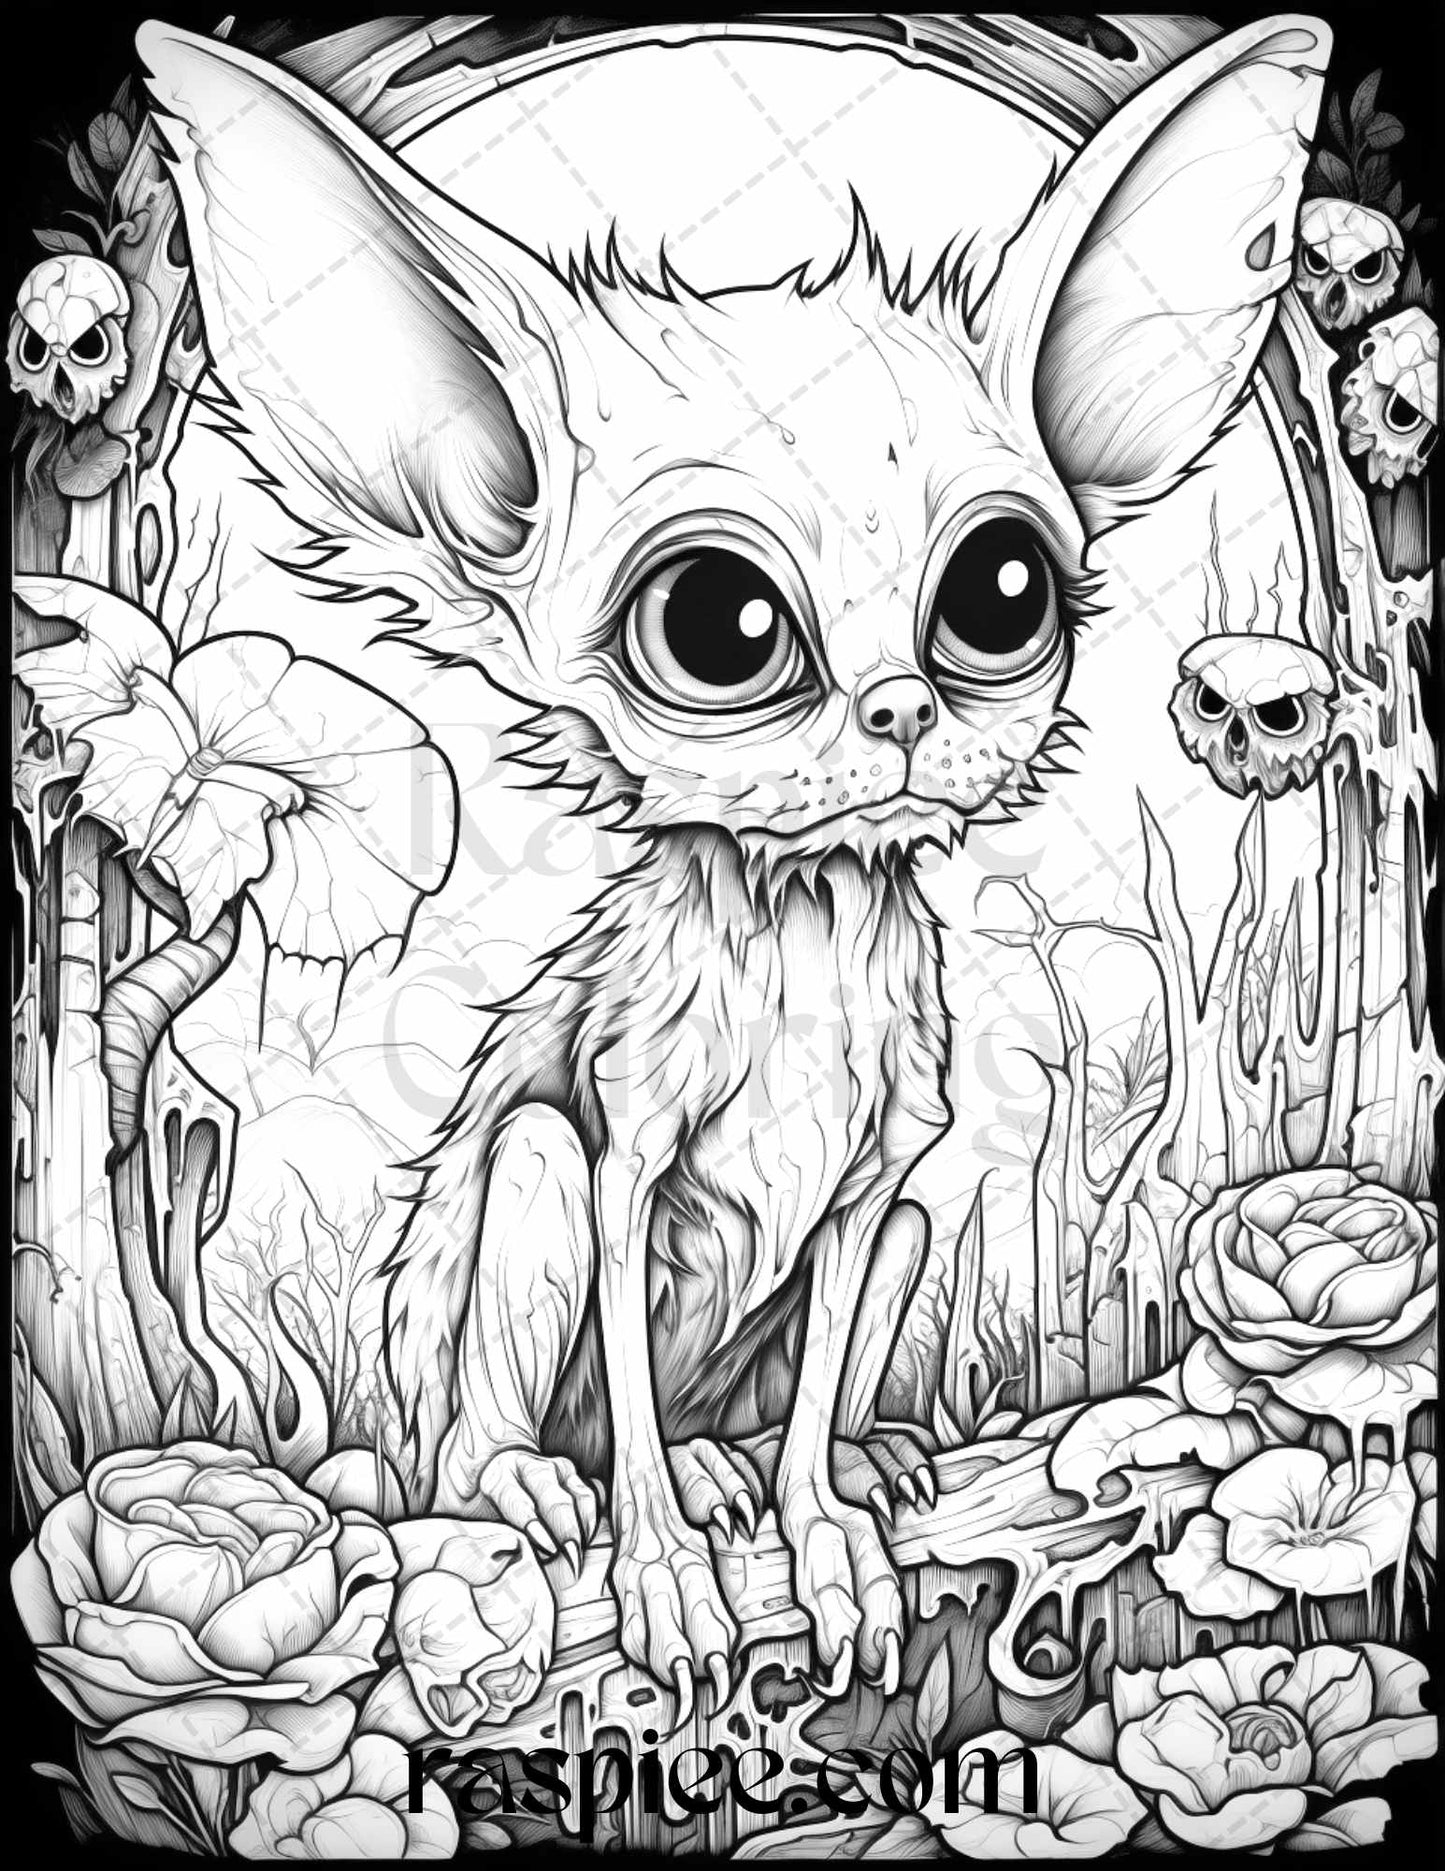 50 Halloween Scary Animals Grayscale Coloring Pages Printable for Adults, PDF File Instant Download - Raspiee Coloring